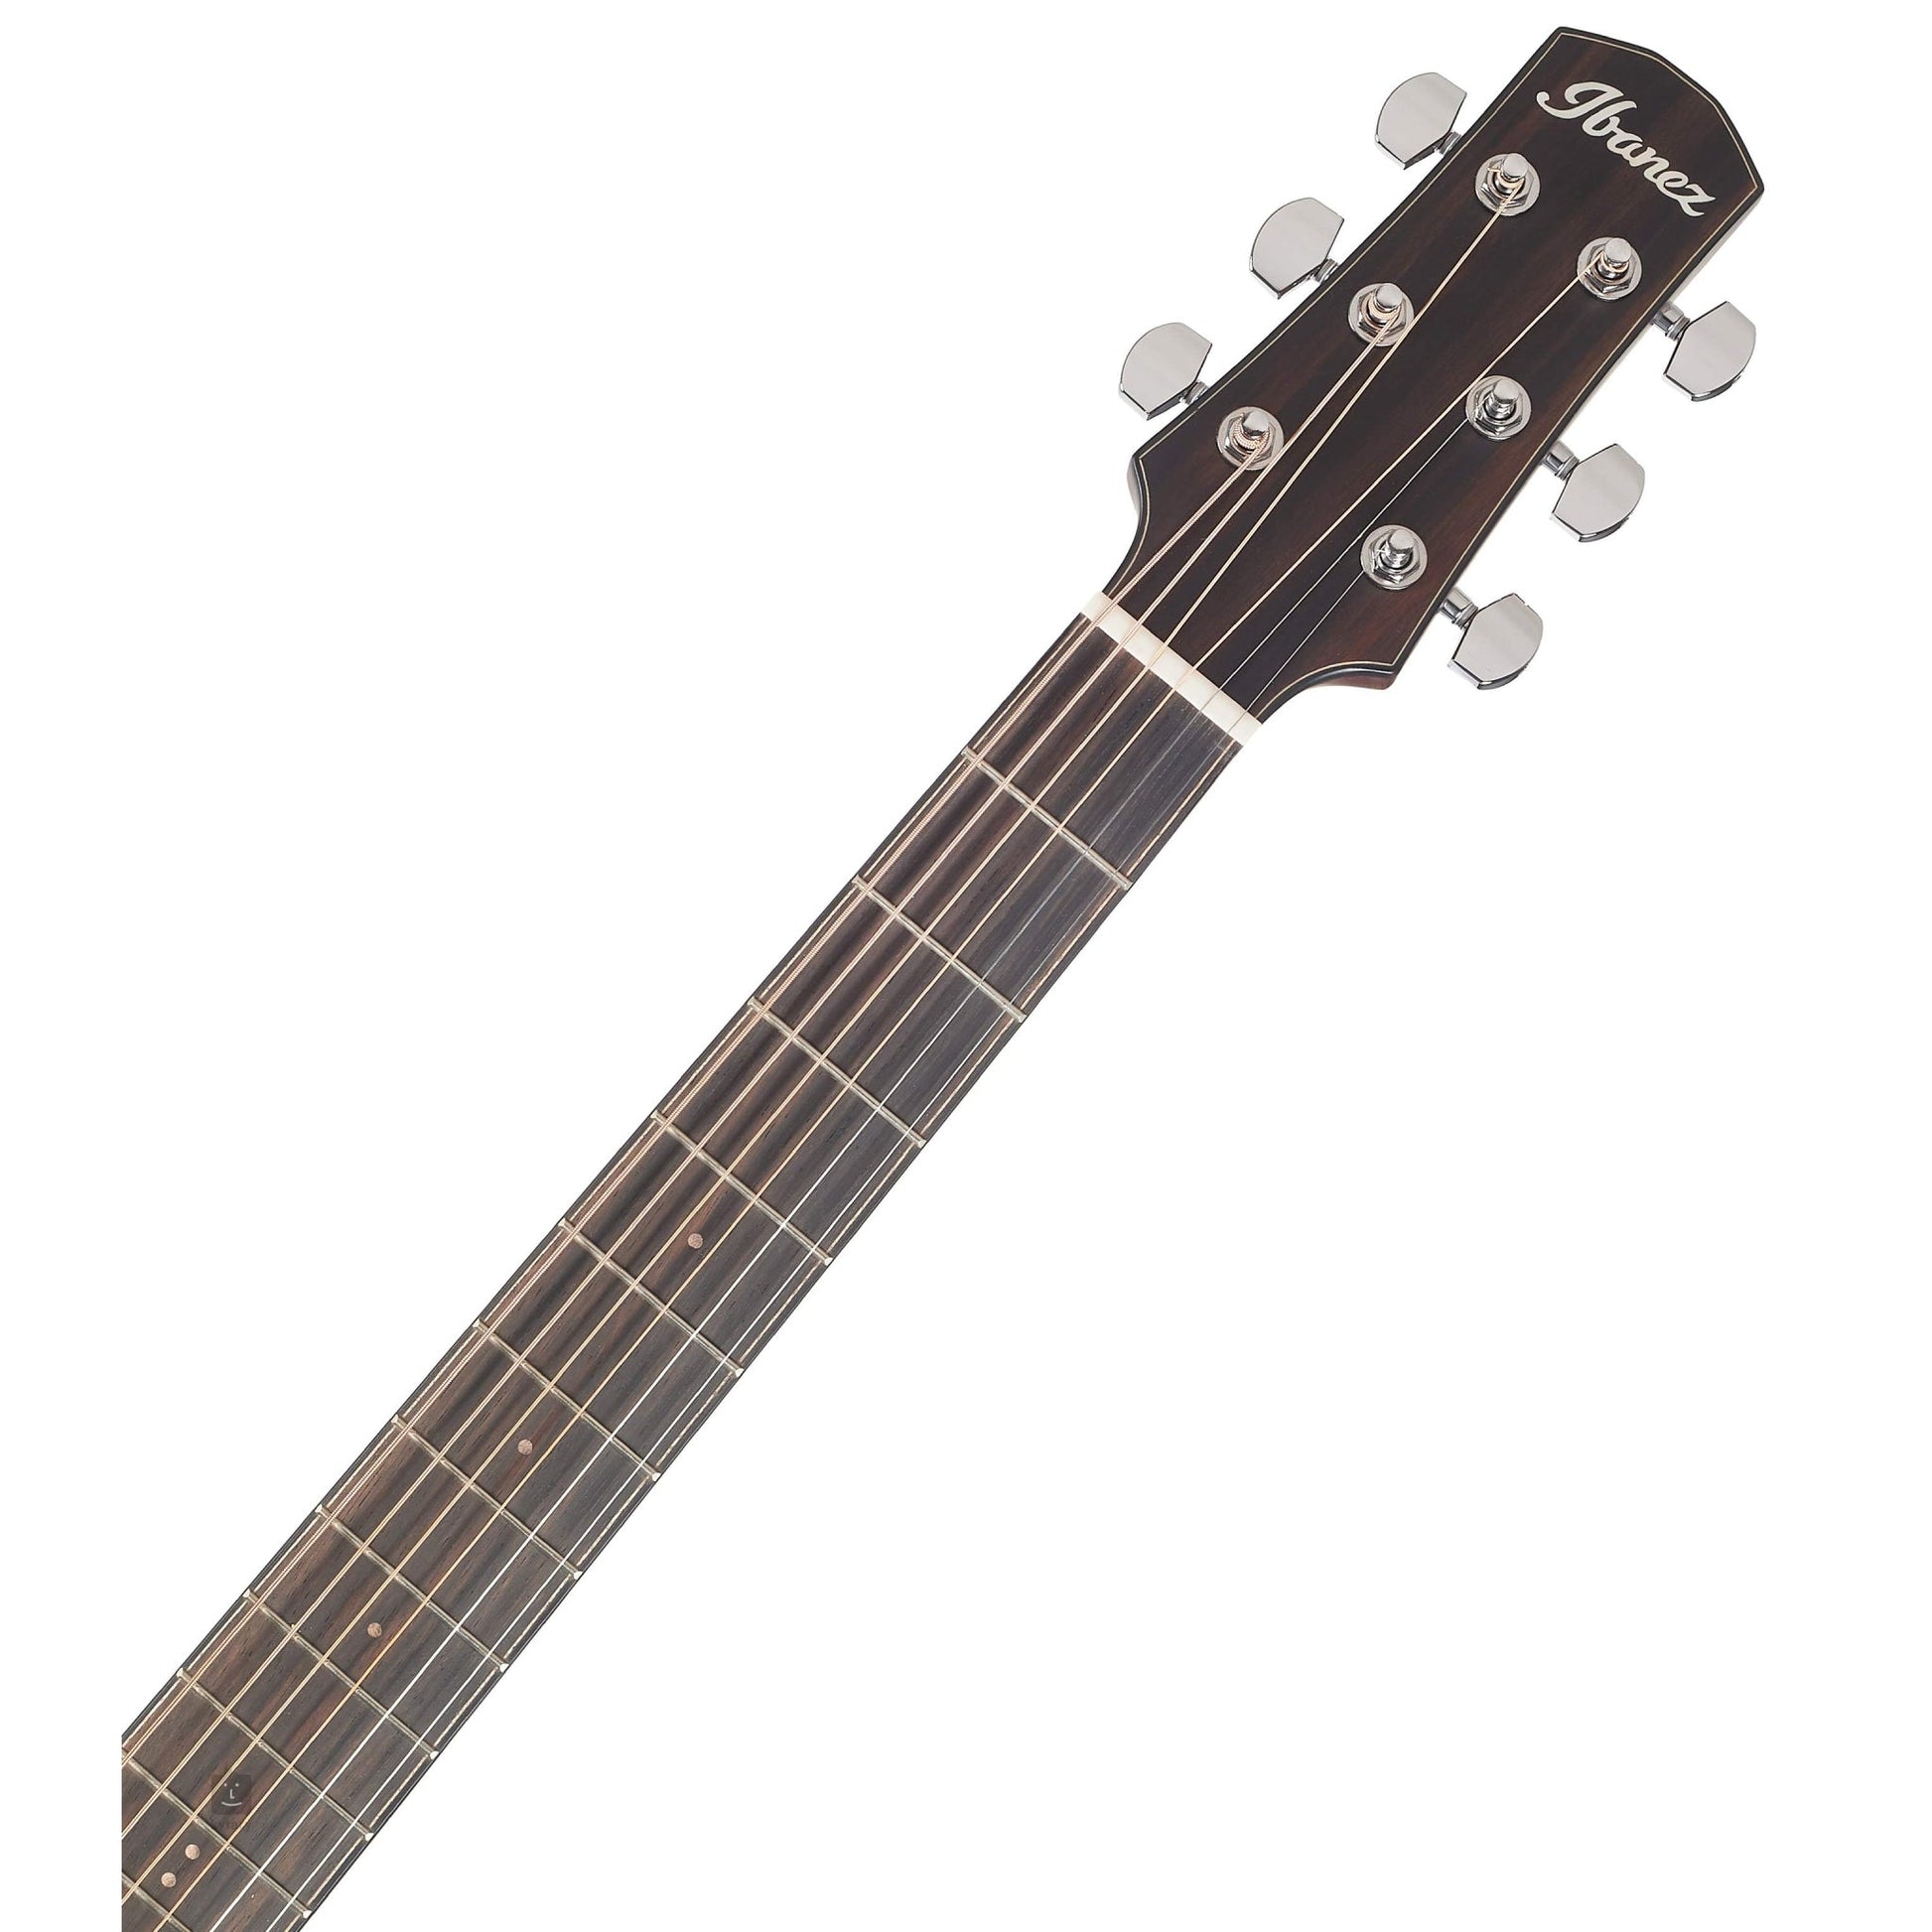 Đàn Guitar Acoustic Ibanez AAD300CE Natural Low Gloss - Việt Music